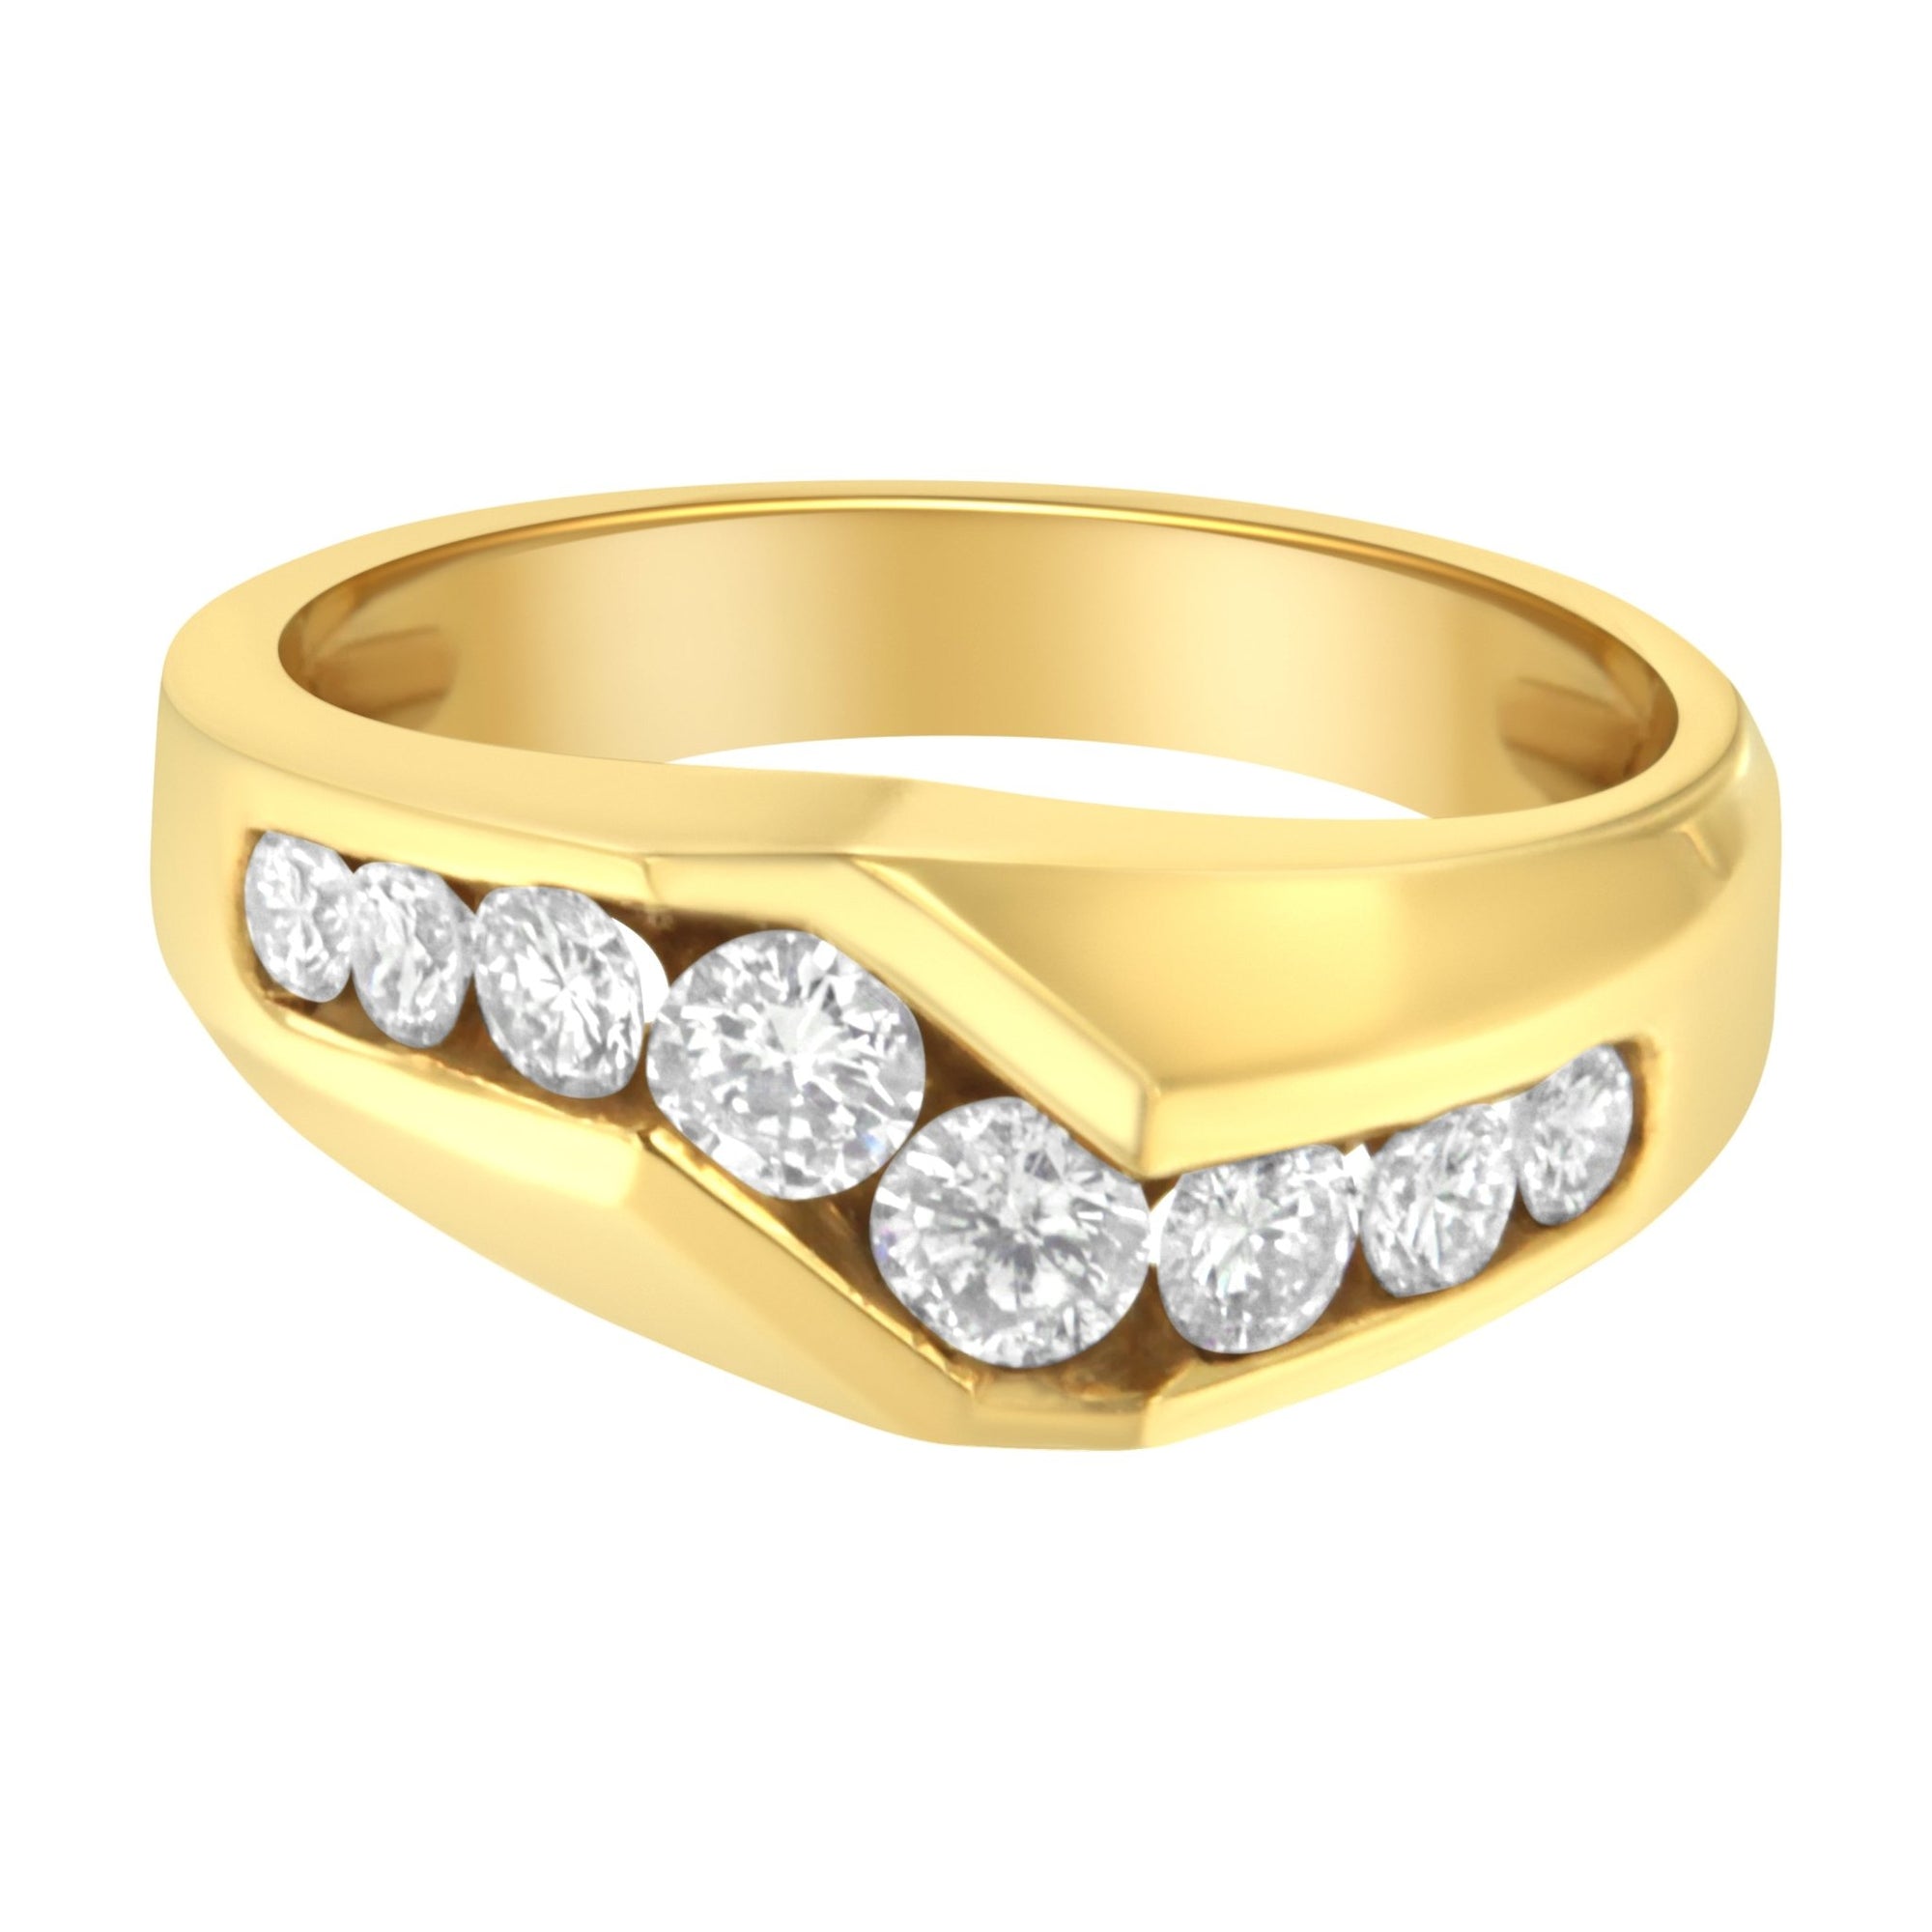 14KT Yellow Gold Men's Round Cut Diamond Ring (1 cttw, H-I Color, SI2-I1 Clarity) - LinkagejewelrydesignLinkagejewelrydesign